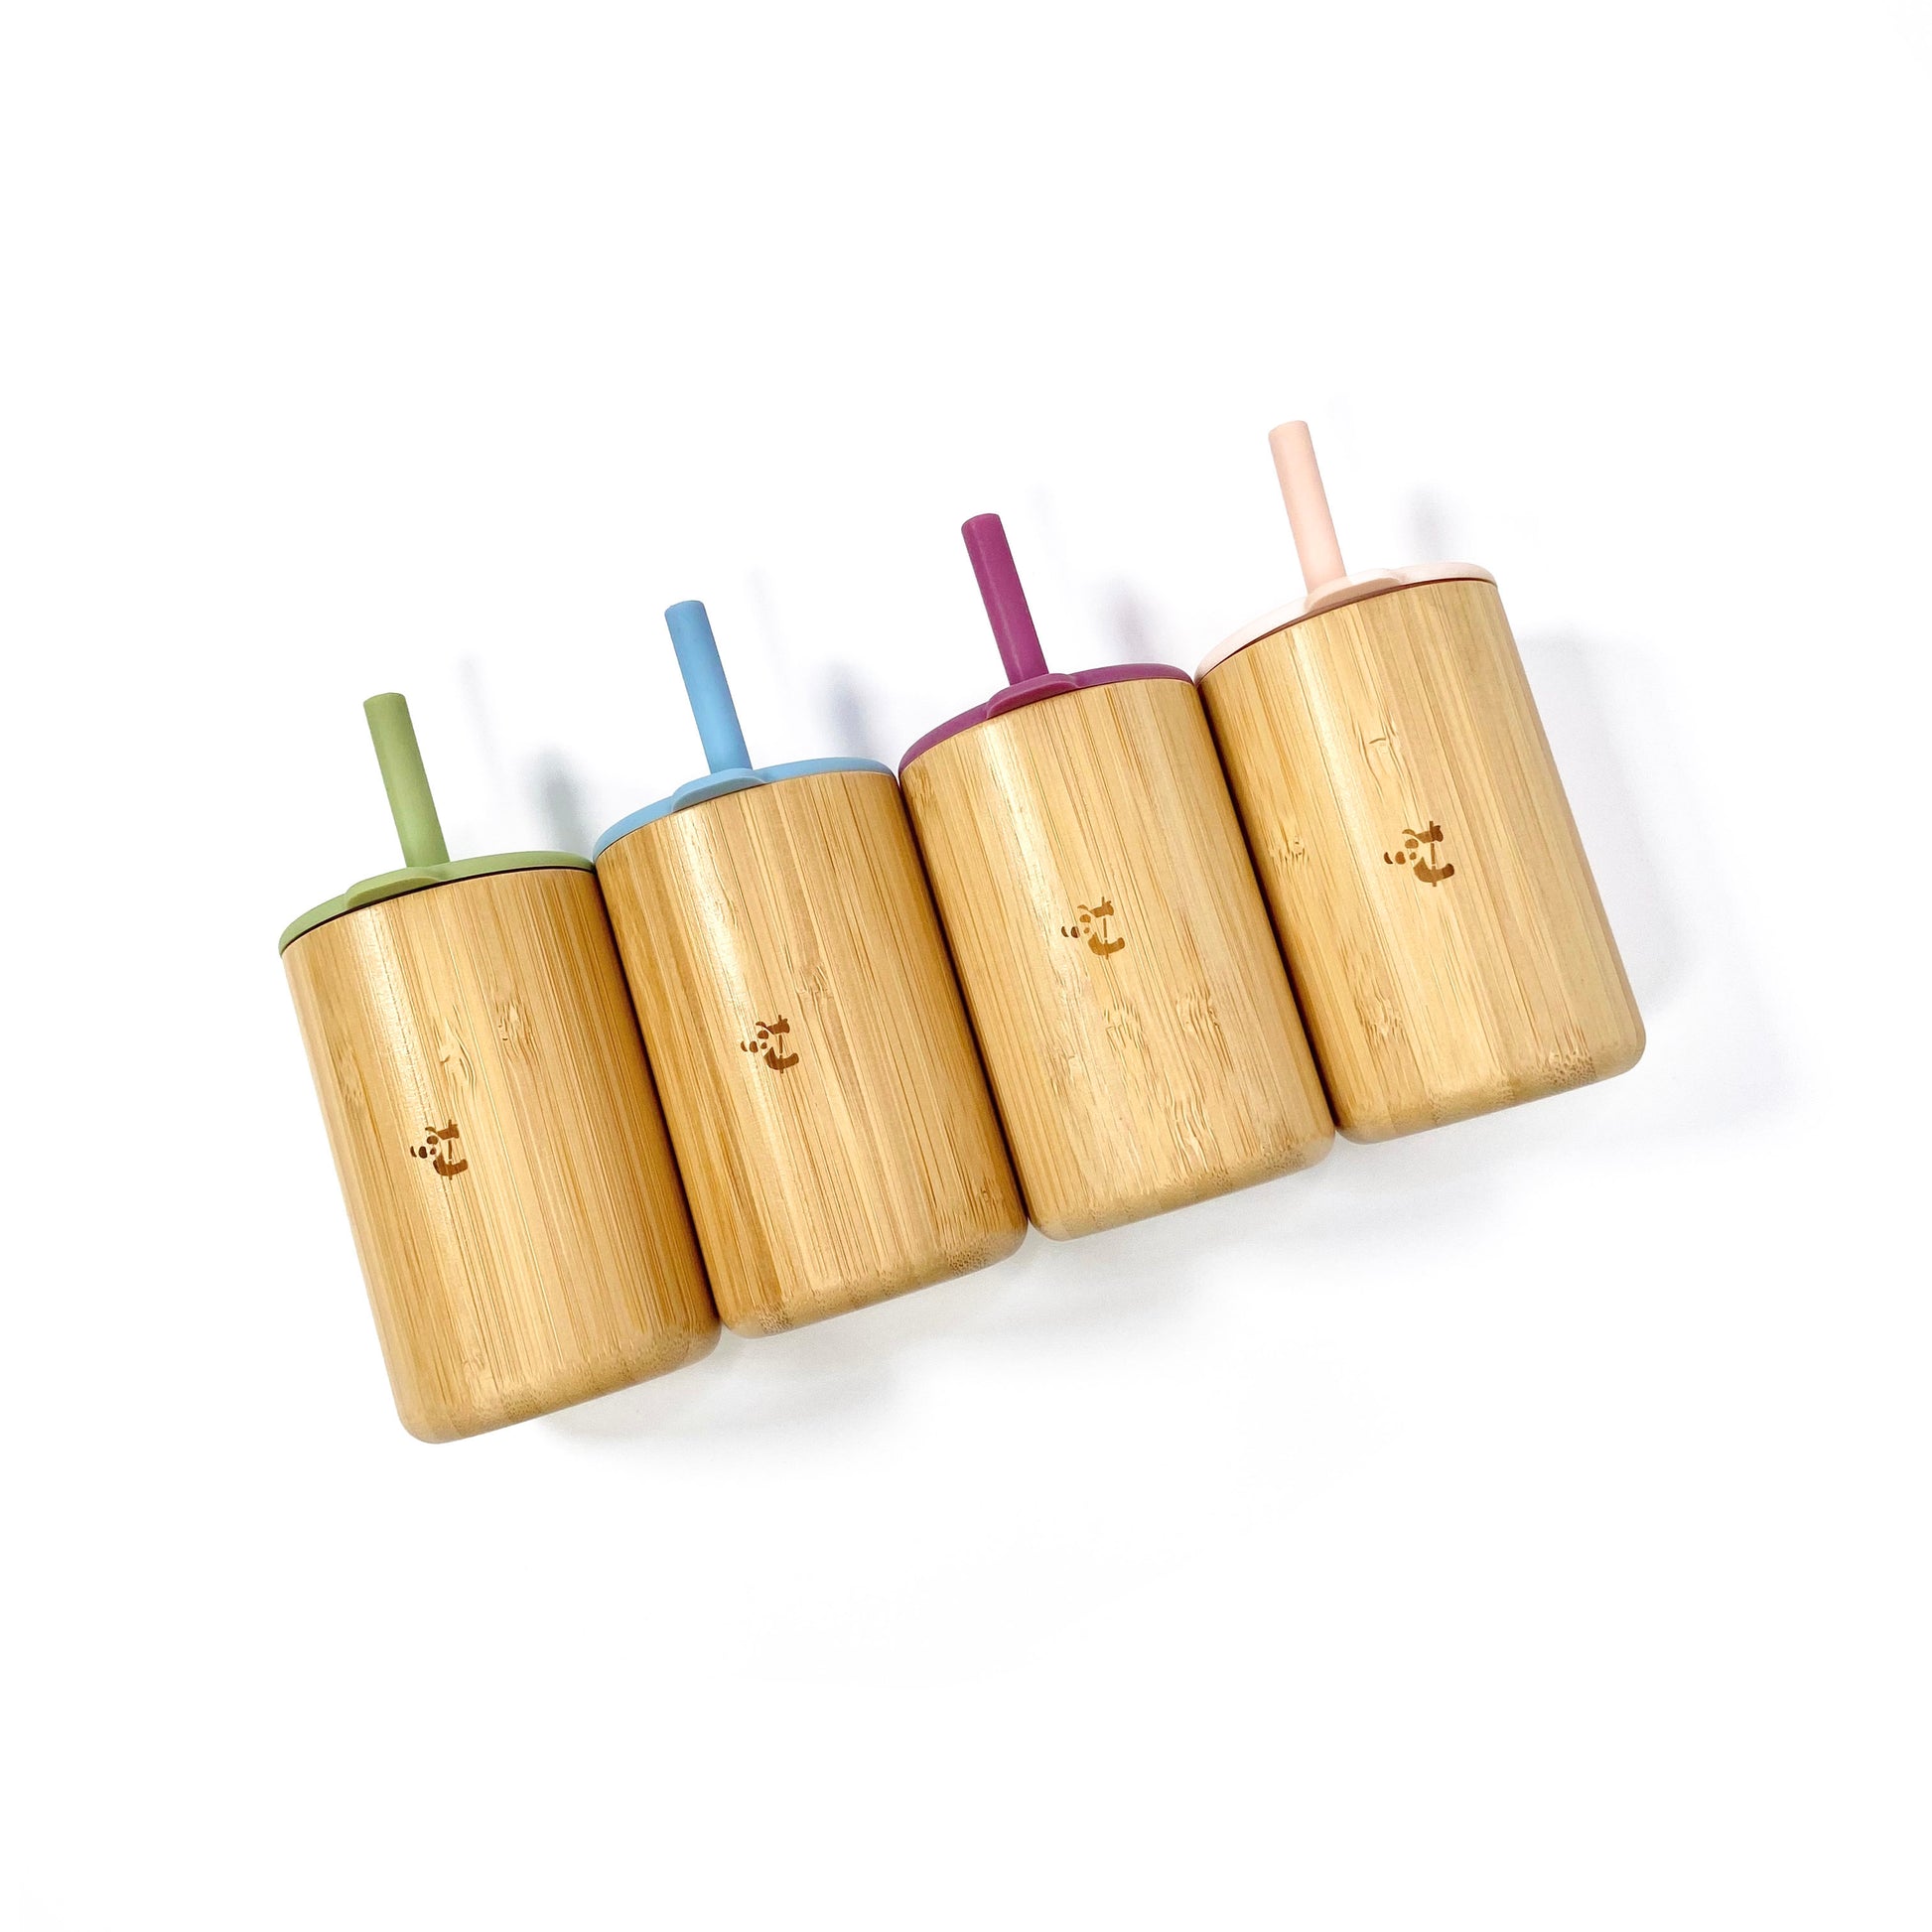 A collection of children’s bamboo drinking cups, with colourful silicone lids and matching straws. View shows the cups from above, arranged in a line displaying the Coco and Bro logos.